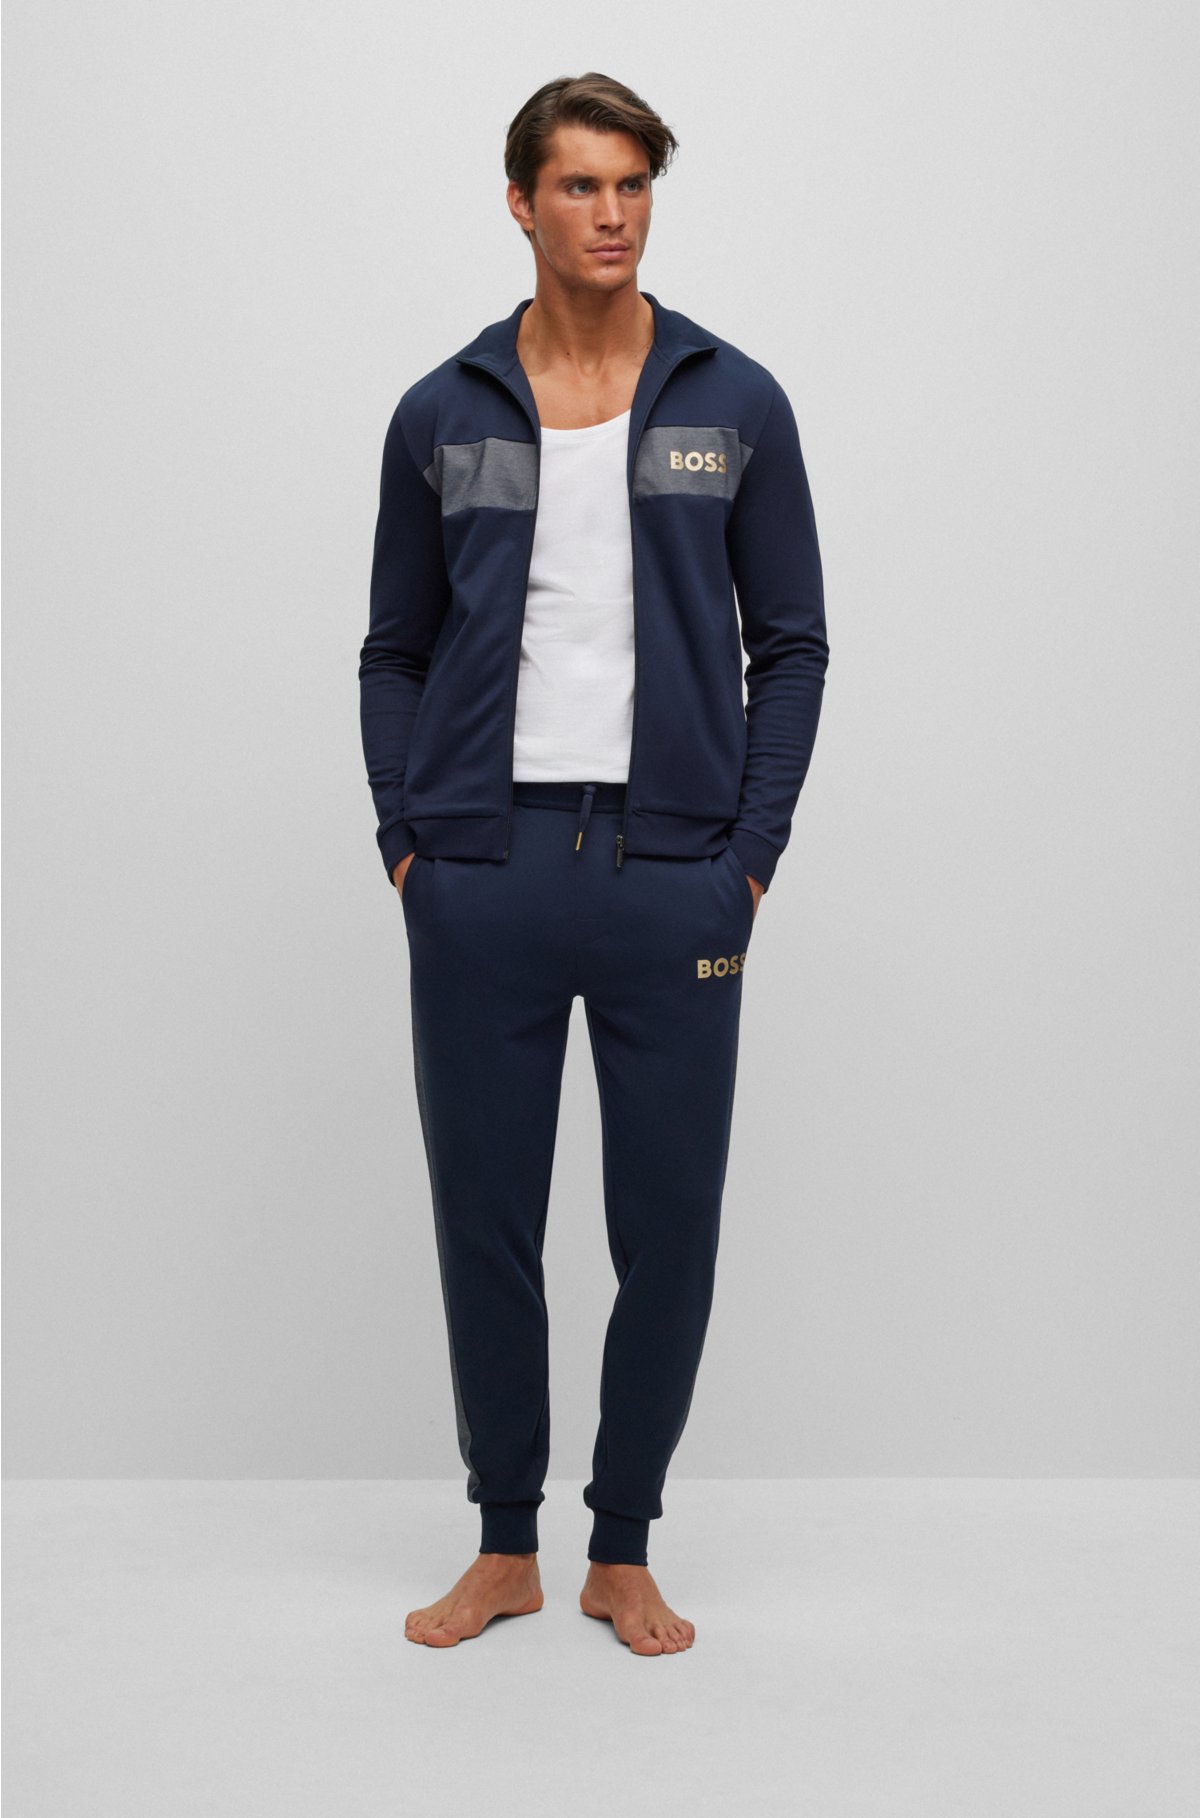 BOSS - with Sweatpants embroidered logo